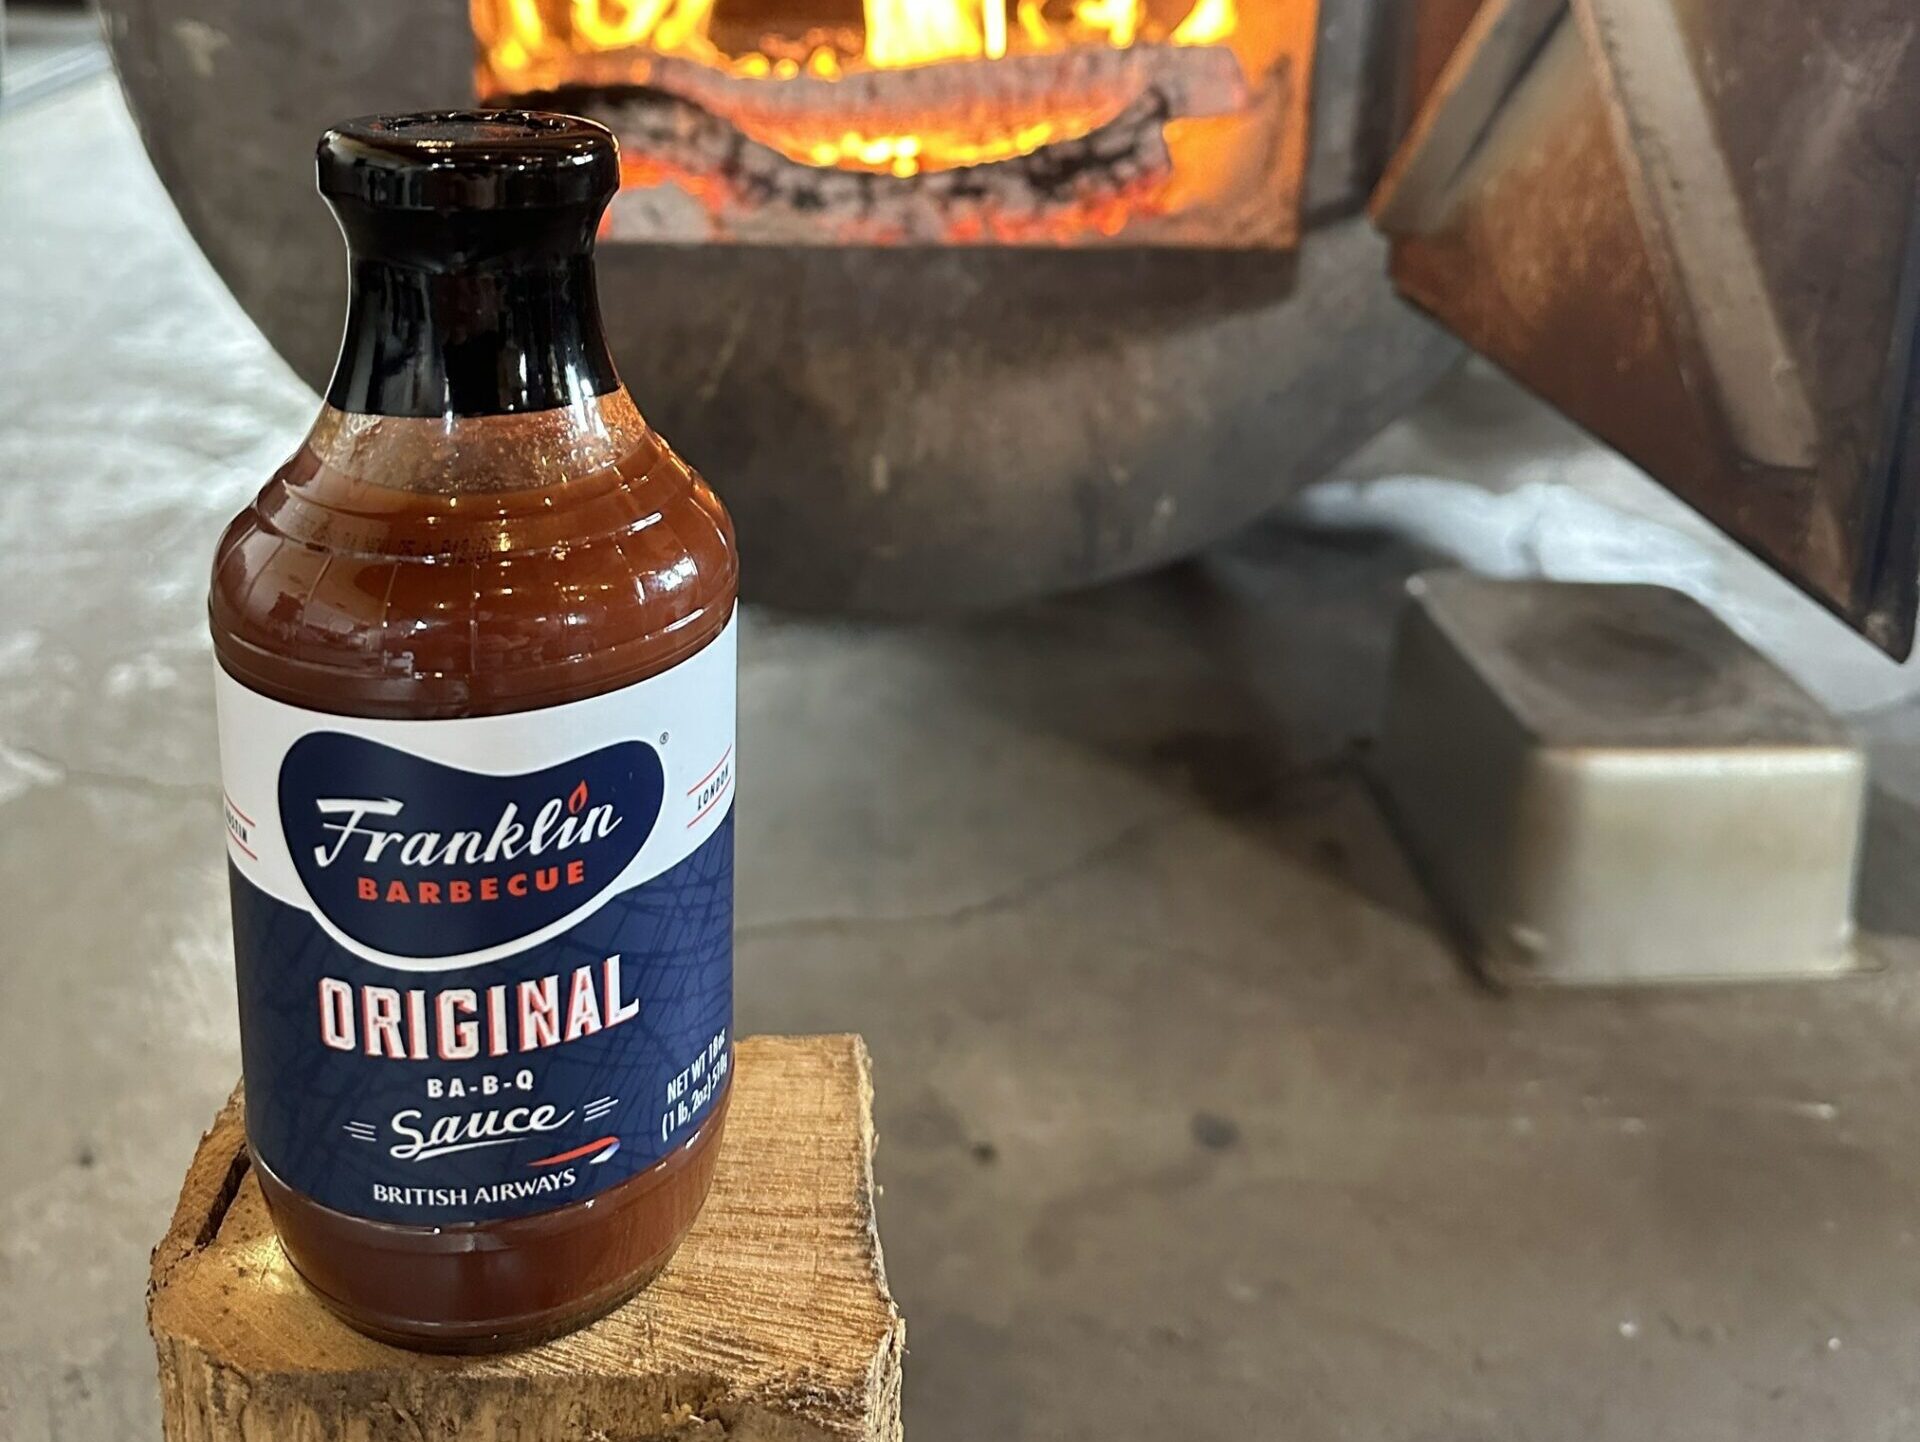 British Airways Celebrates 10 Years Flying to Austin with Limited-Edition BA-B-Q Sauce